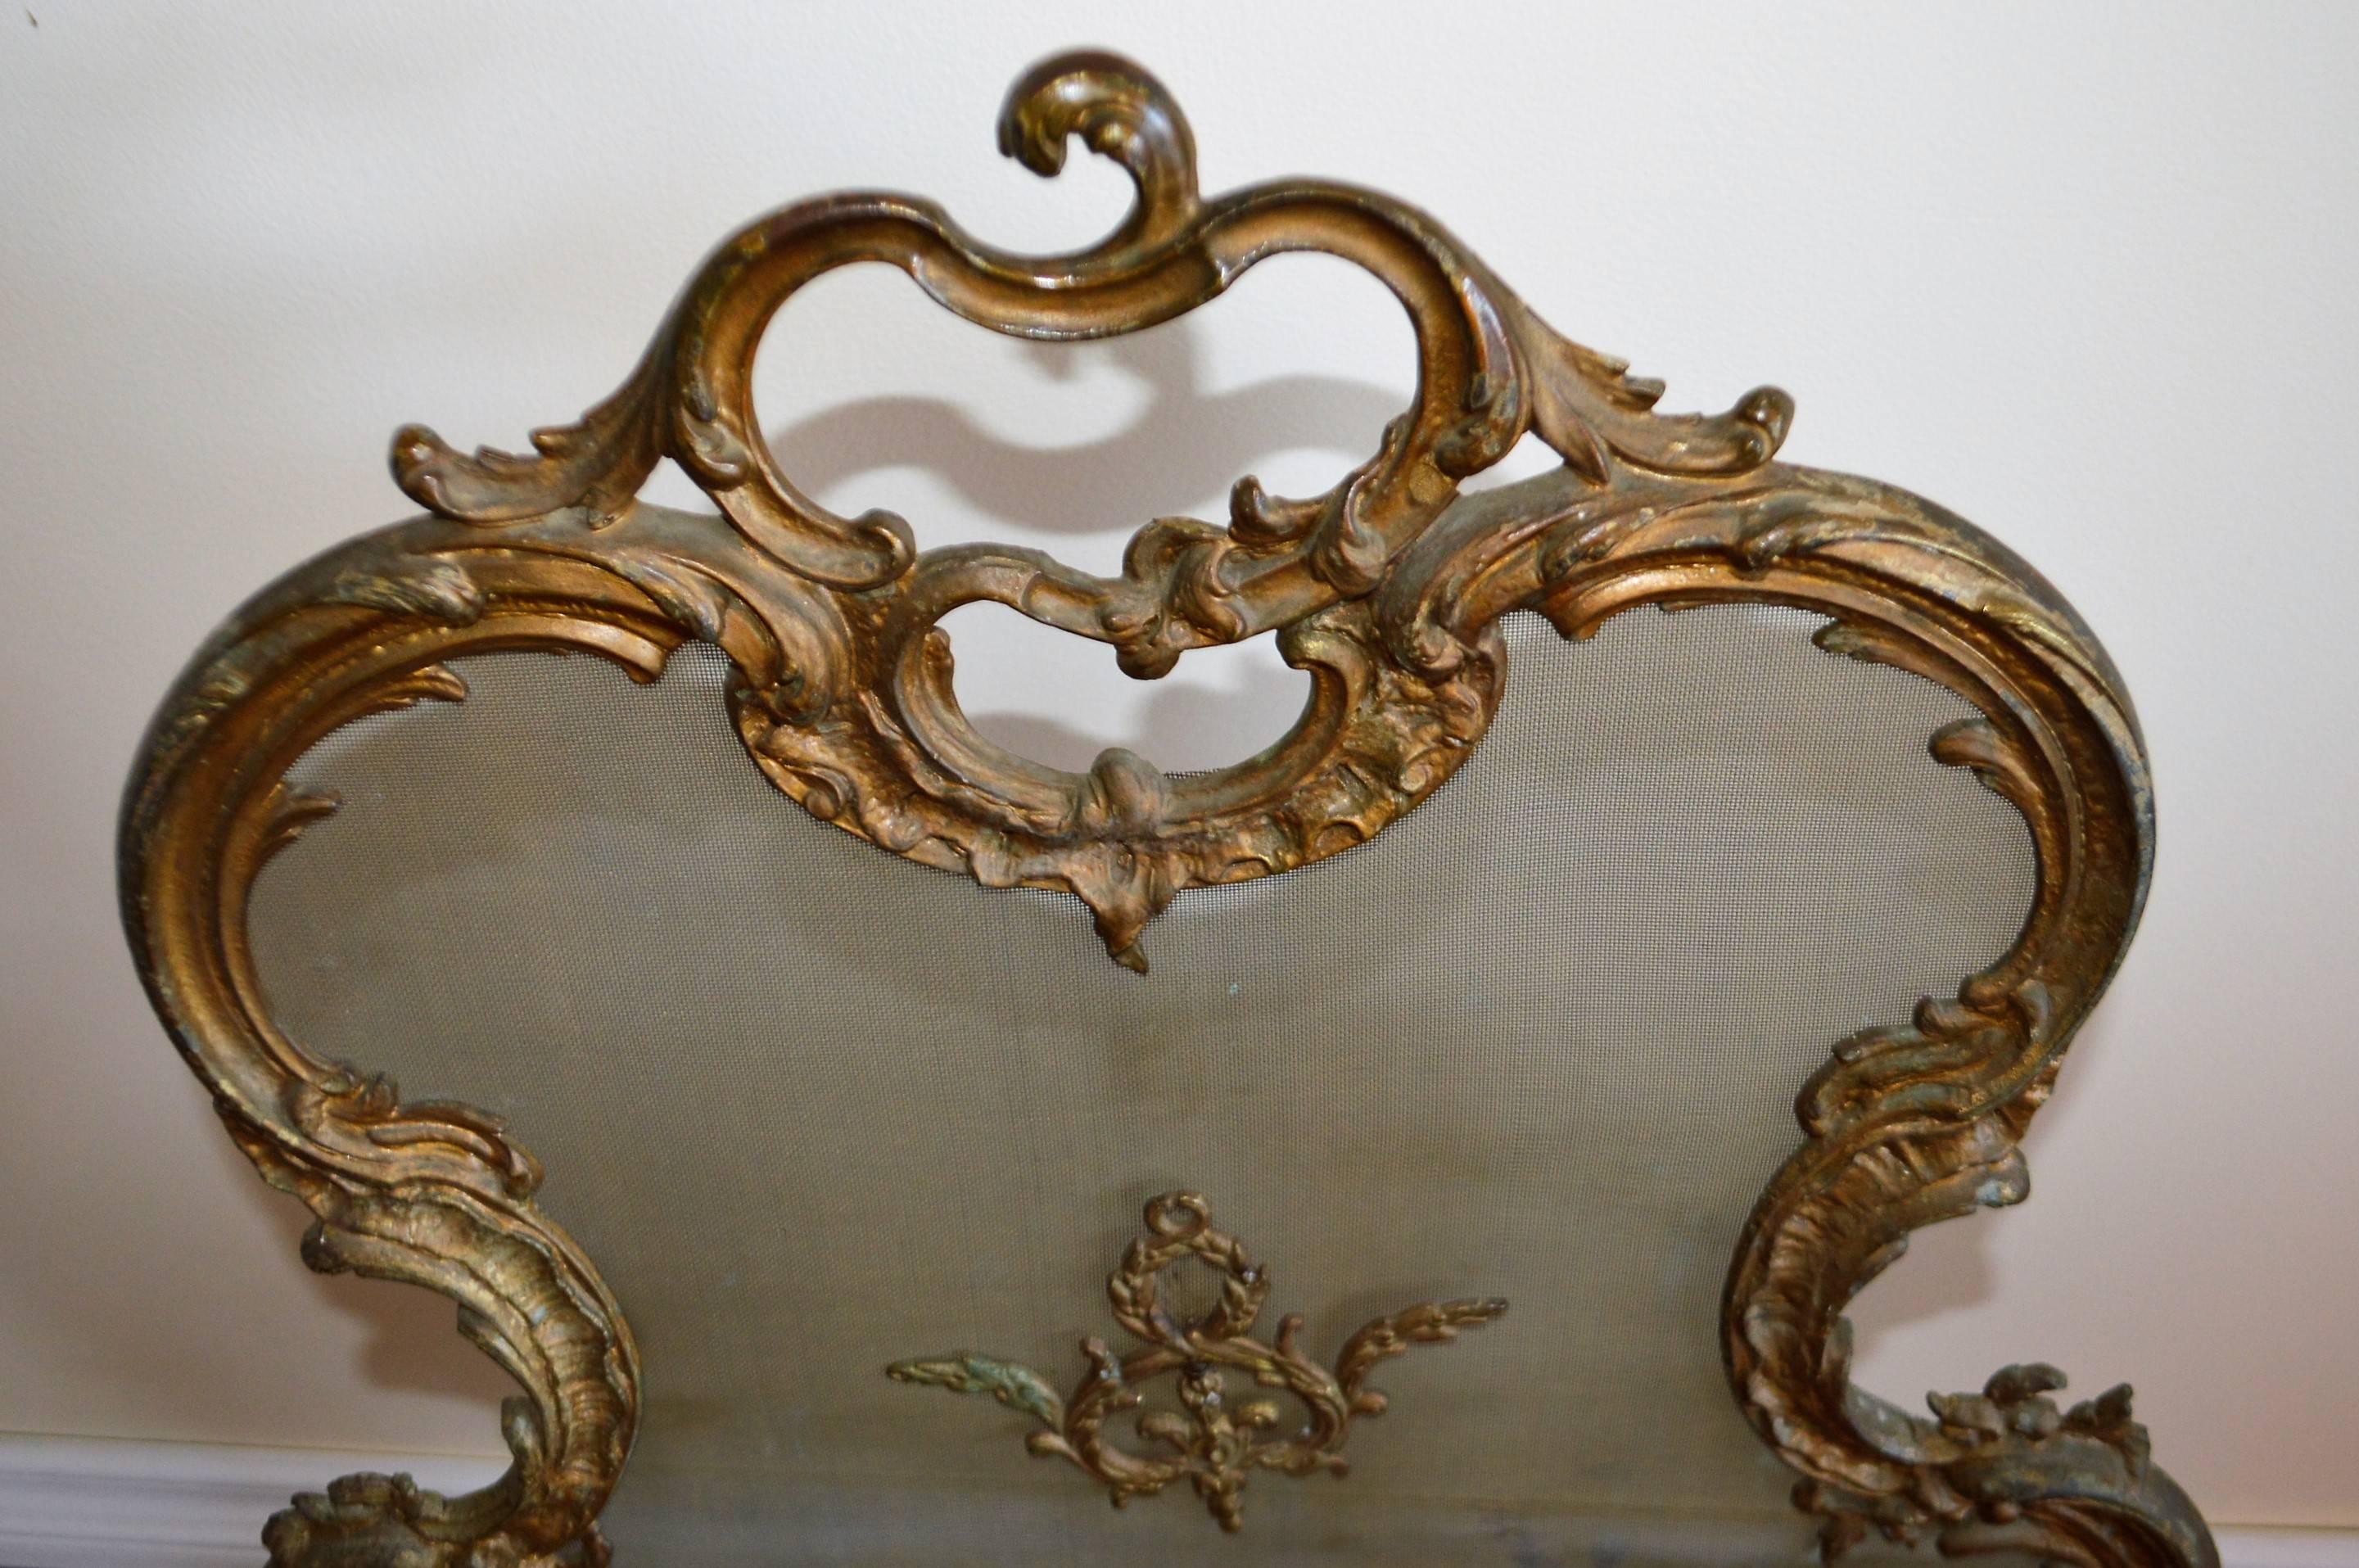 Highly decorative bronze fireplace screen, perfect for a small cozy fireplace.